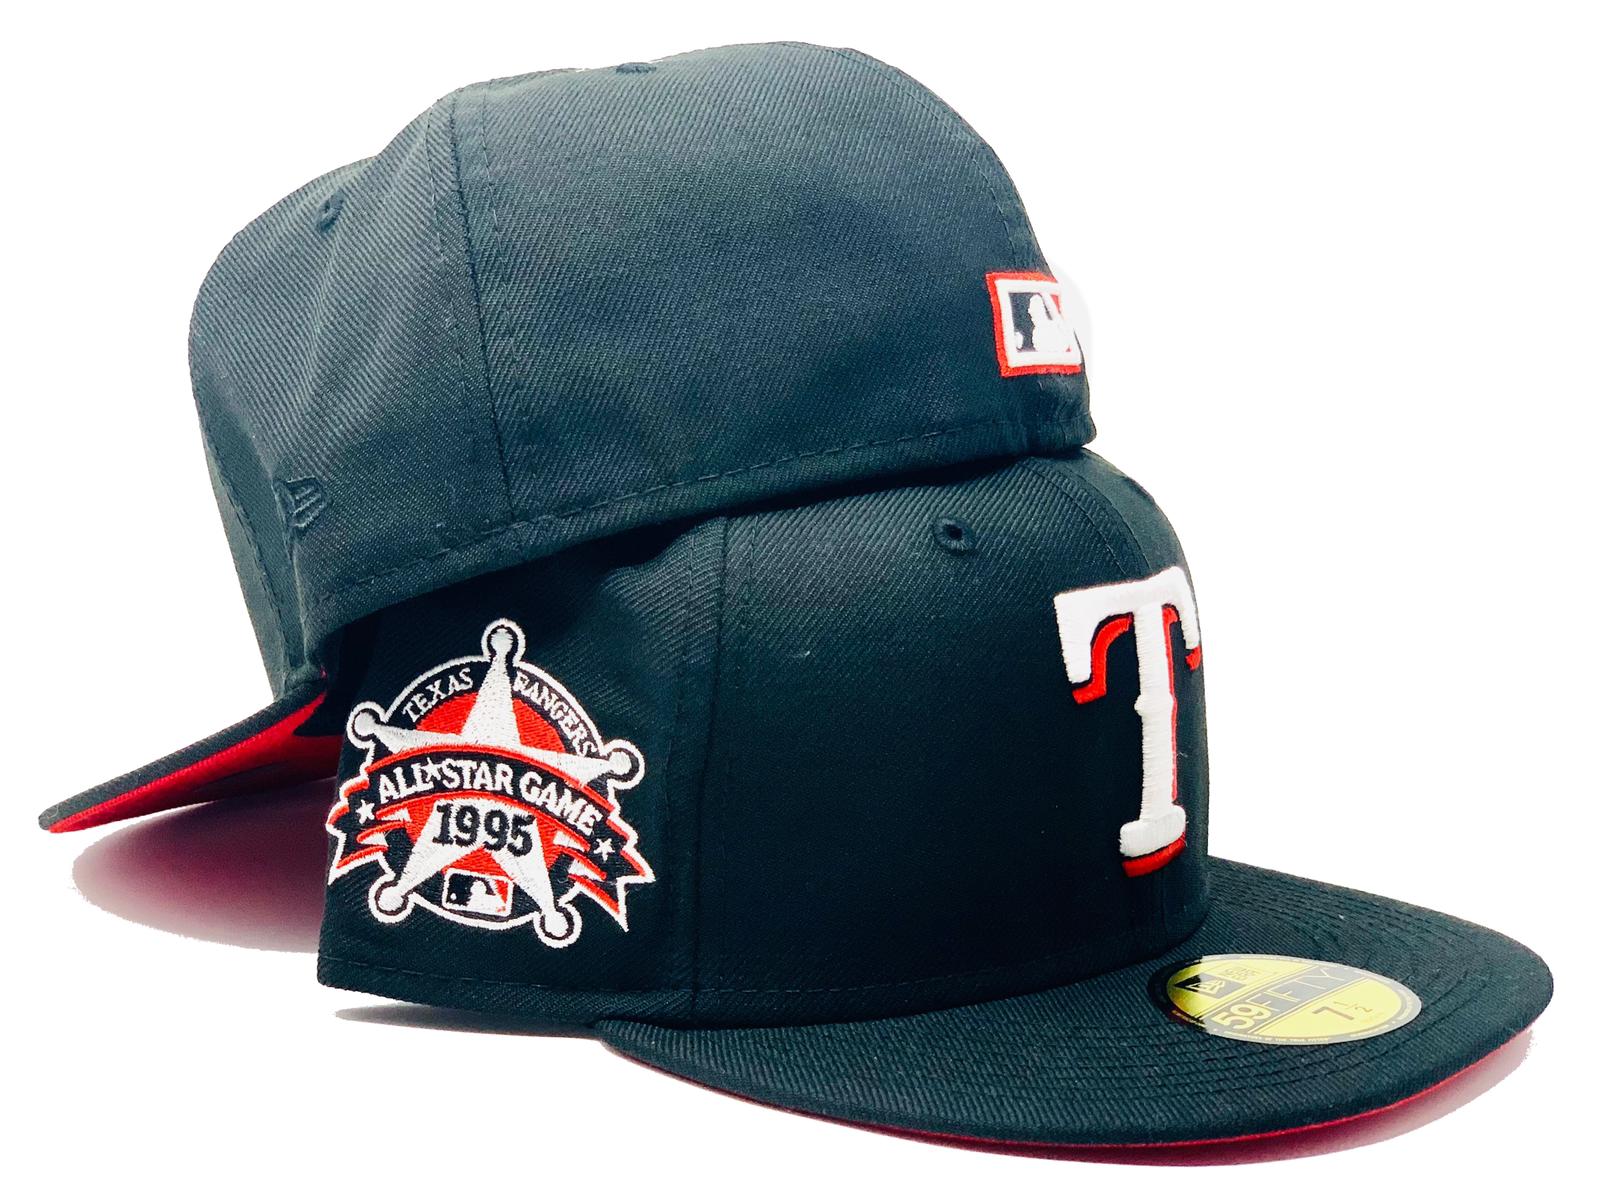 Texas Rangers mlb hat all star game 2019 size 7 3/8